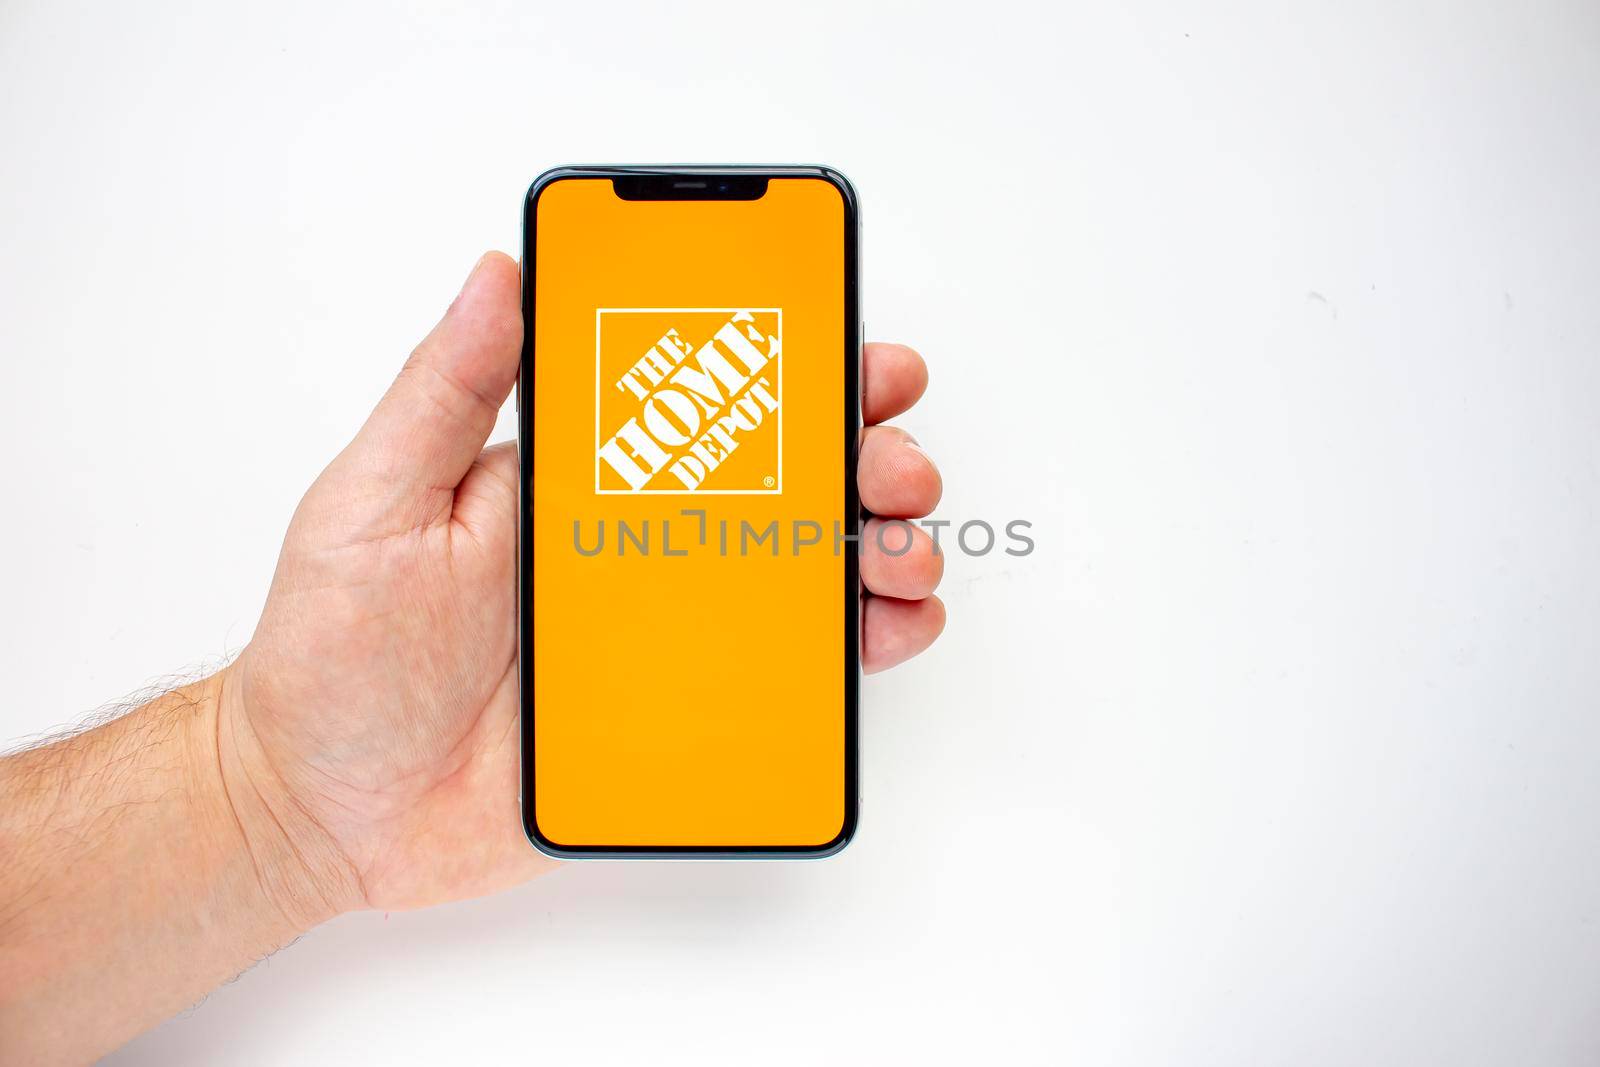 Calgary, Alberta, Canada. Aug 15, 2020. A person holding an iPhone 11 Pro Max with the Home Depot App